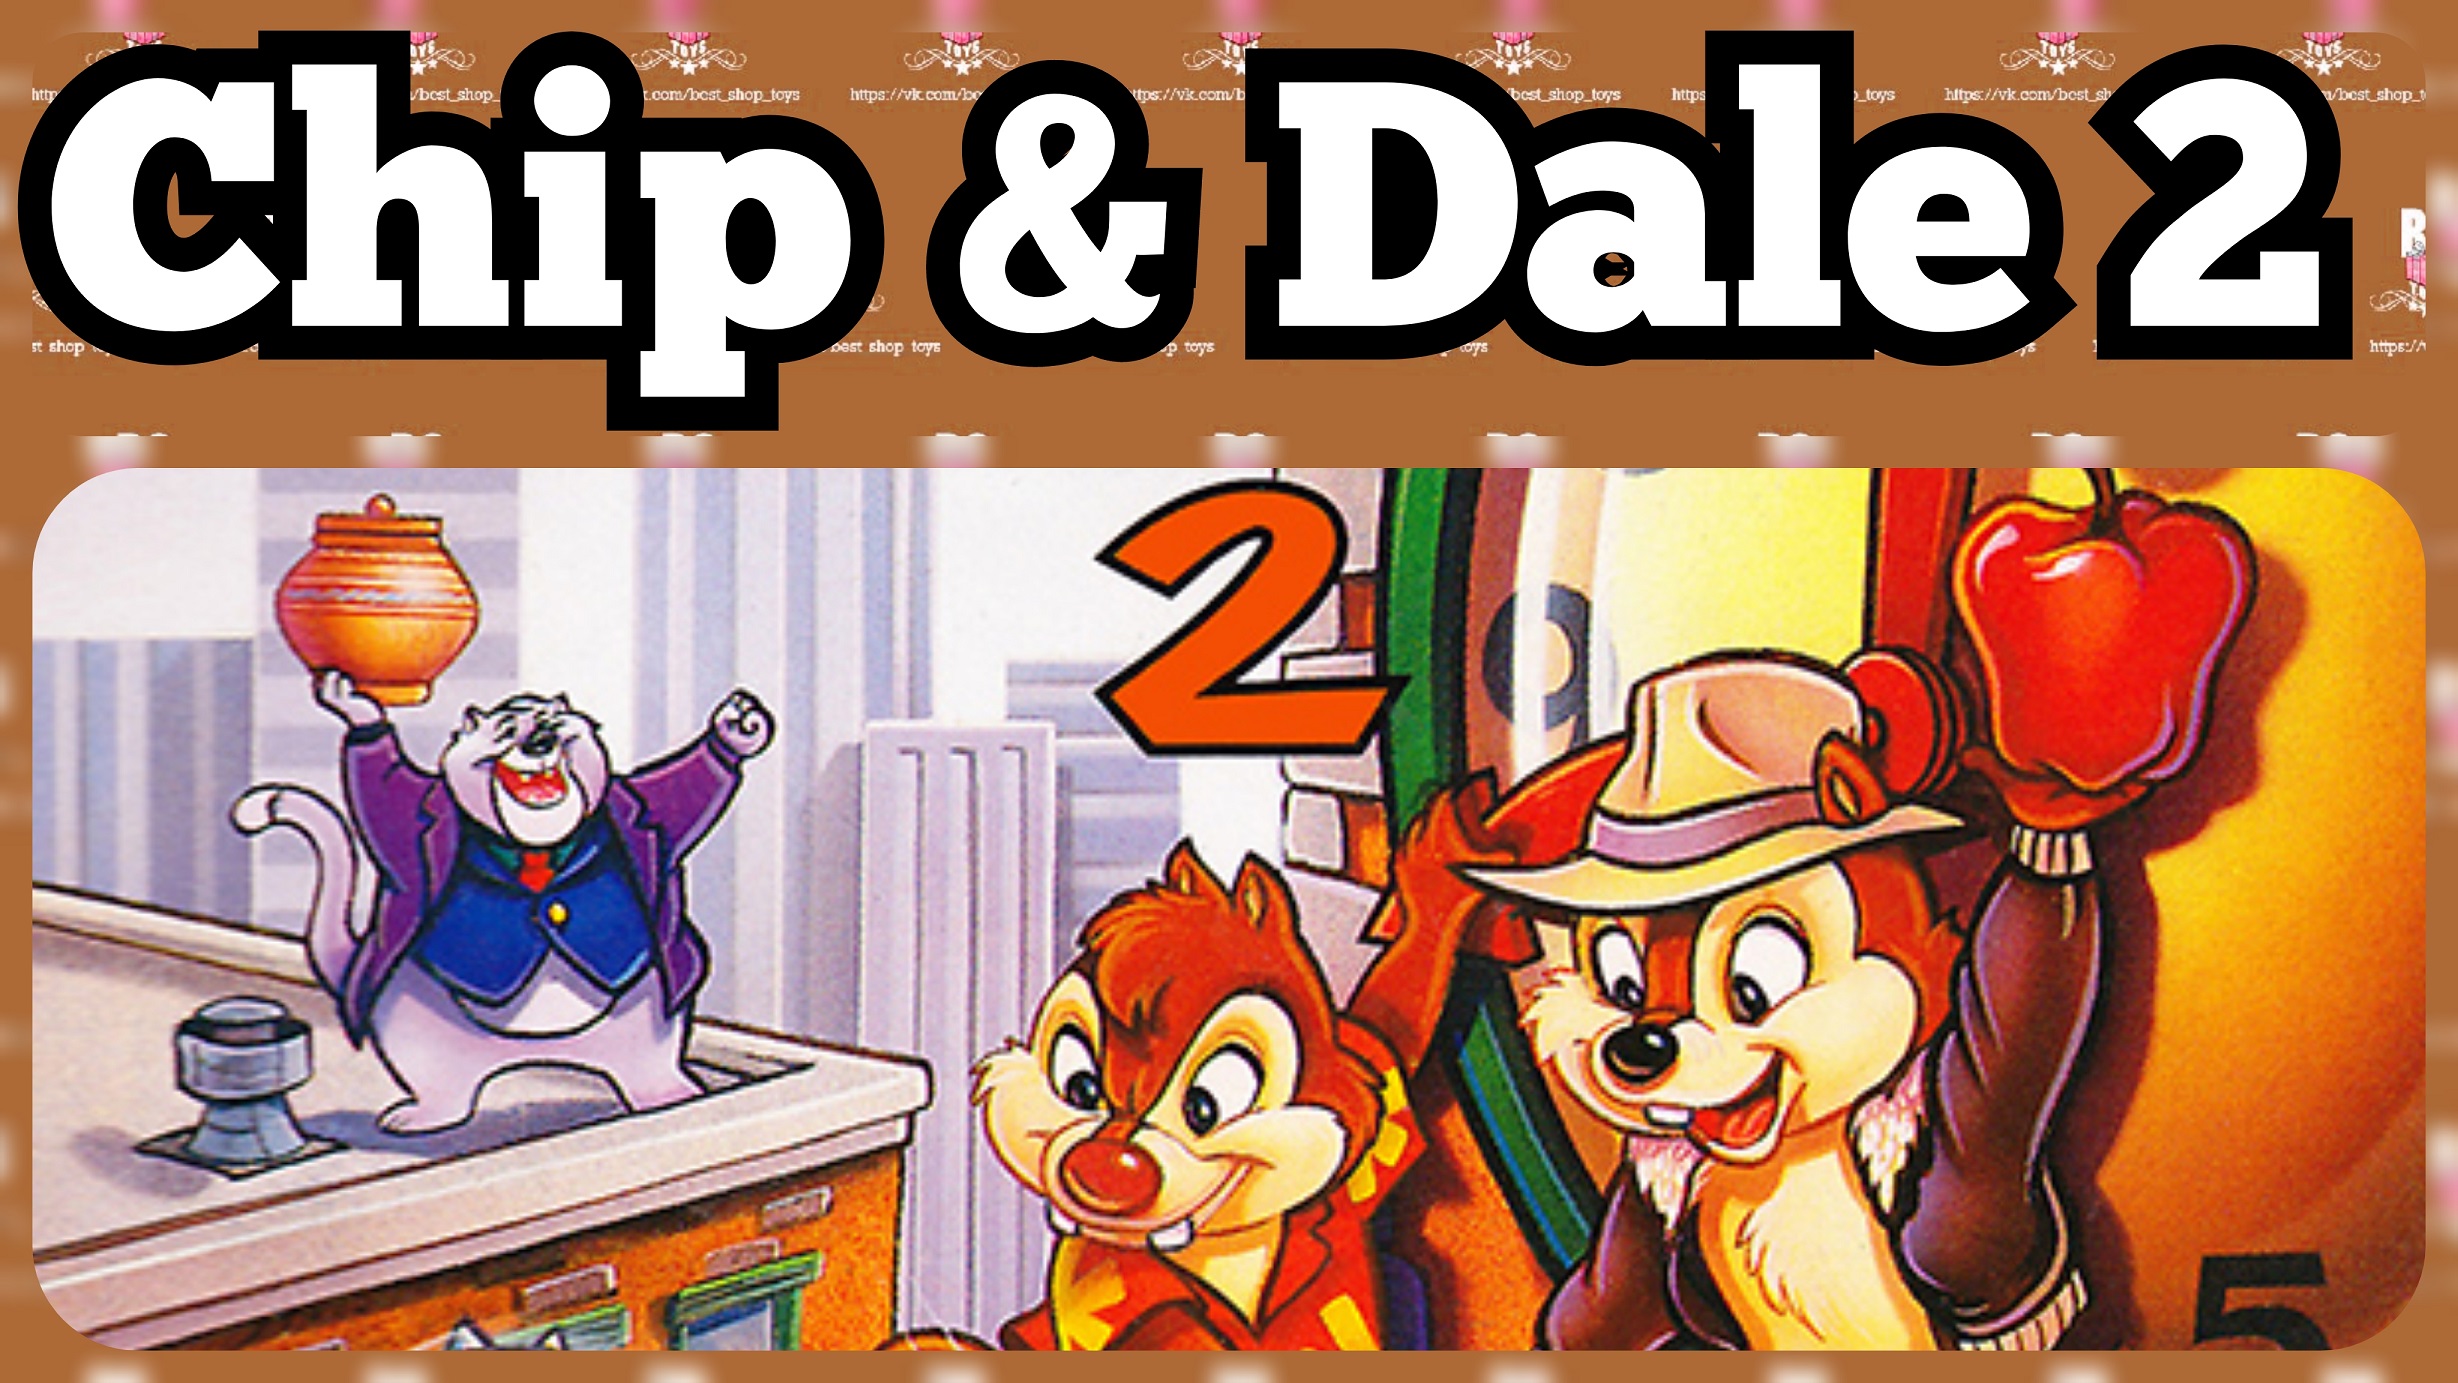 Chip and dale 2. Чип и Дейл 2 Dendy. Chip 'n Dale Rescue Rangers 2 Dendy. Чип и Дейл игра 1 часть. Chip n Dale Rescue Rangers Famicom.